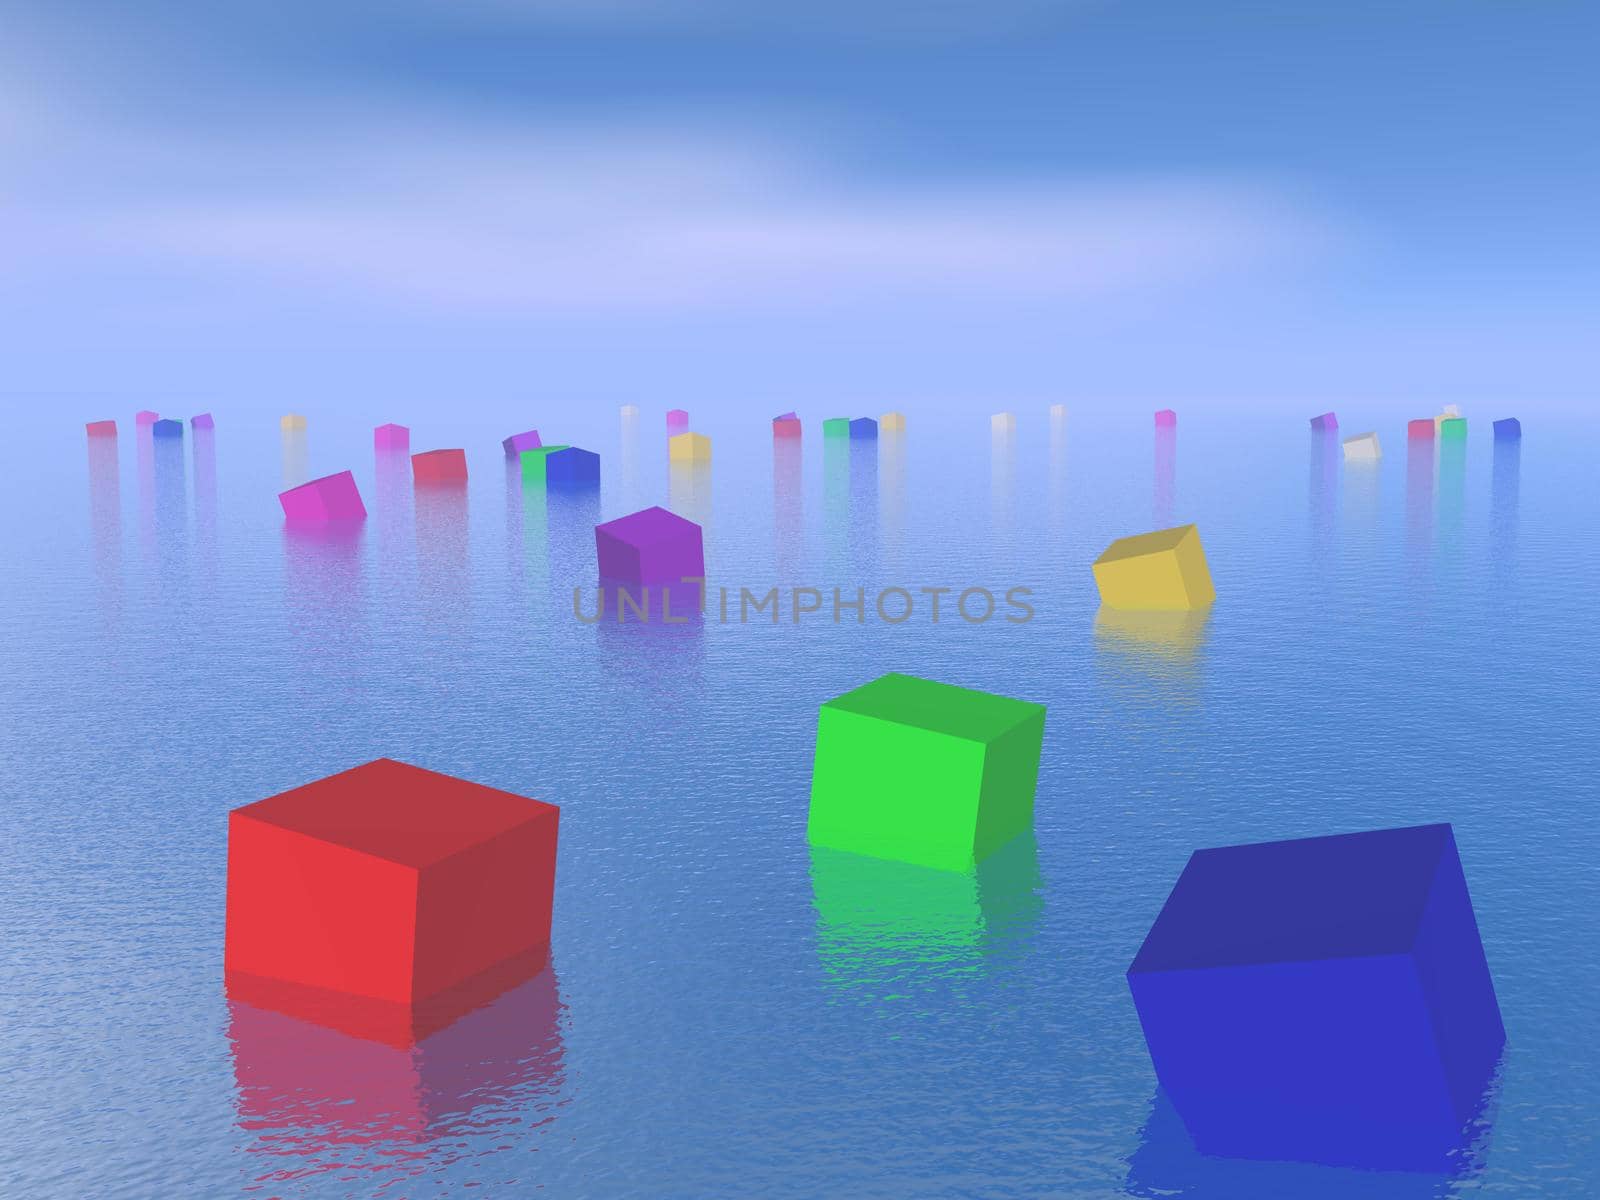 Many colorful cubes floating upon the water by beautiful blue day